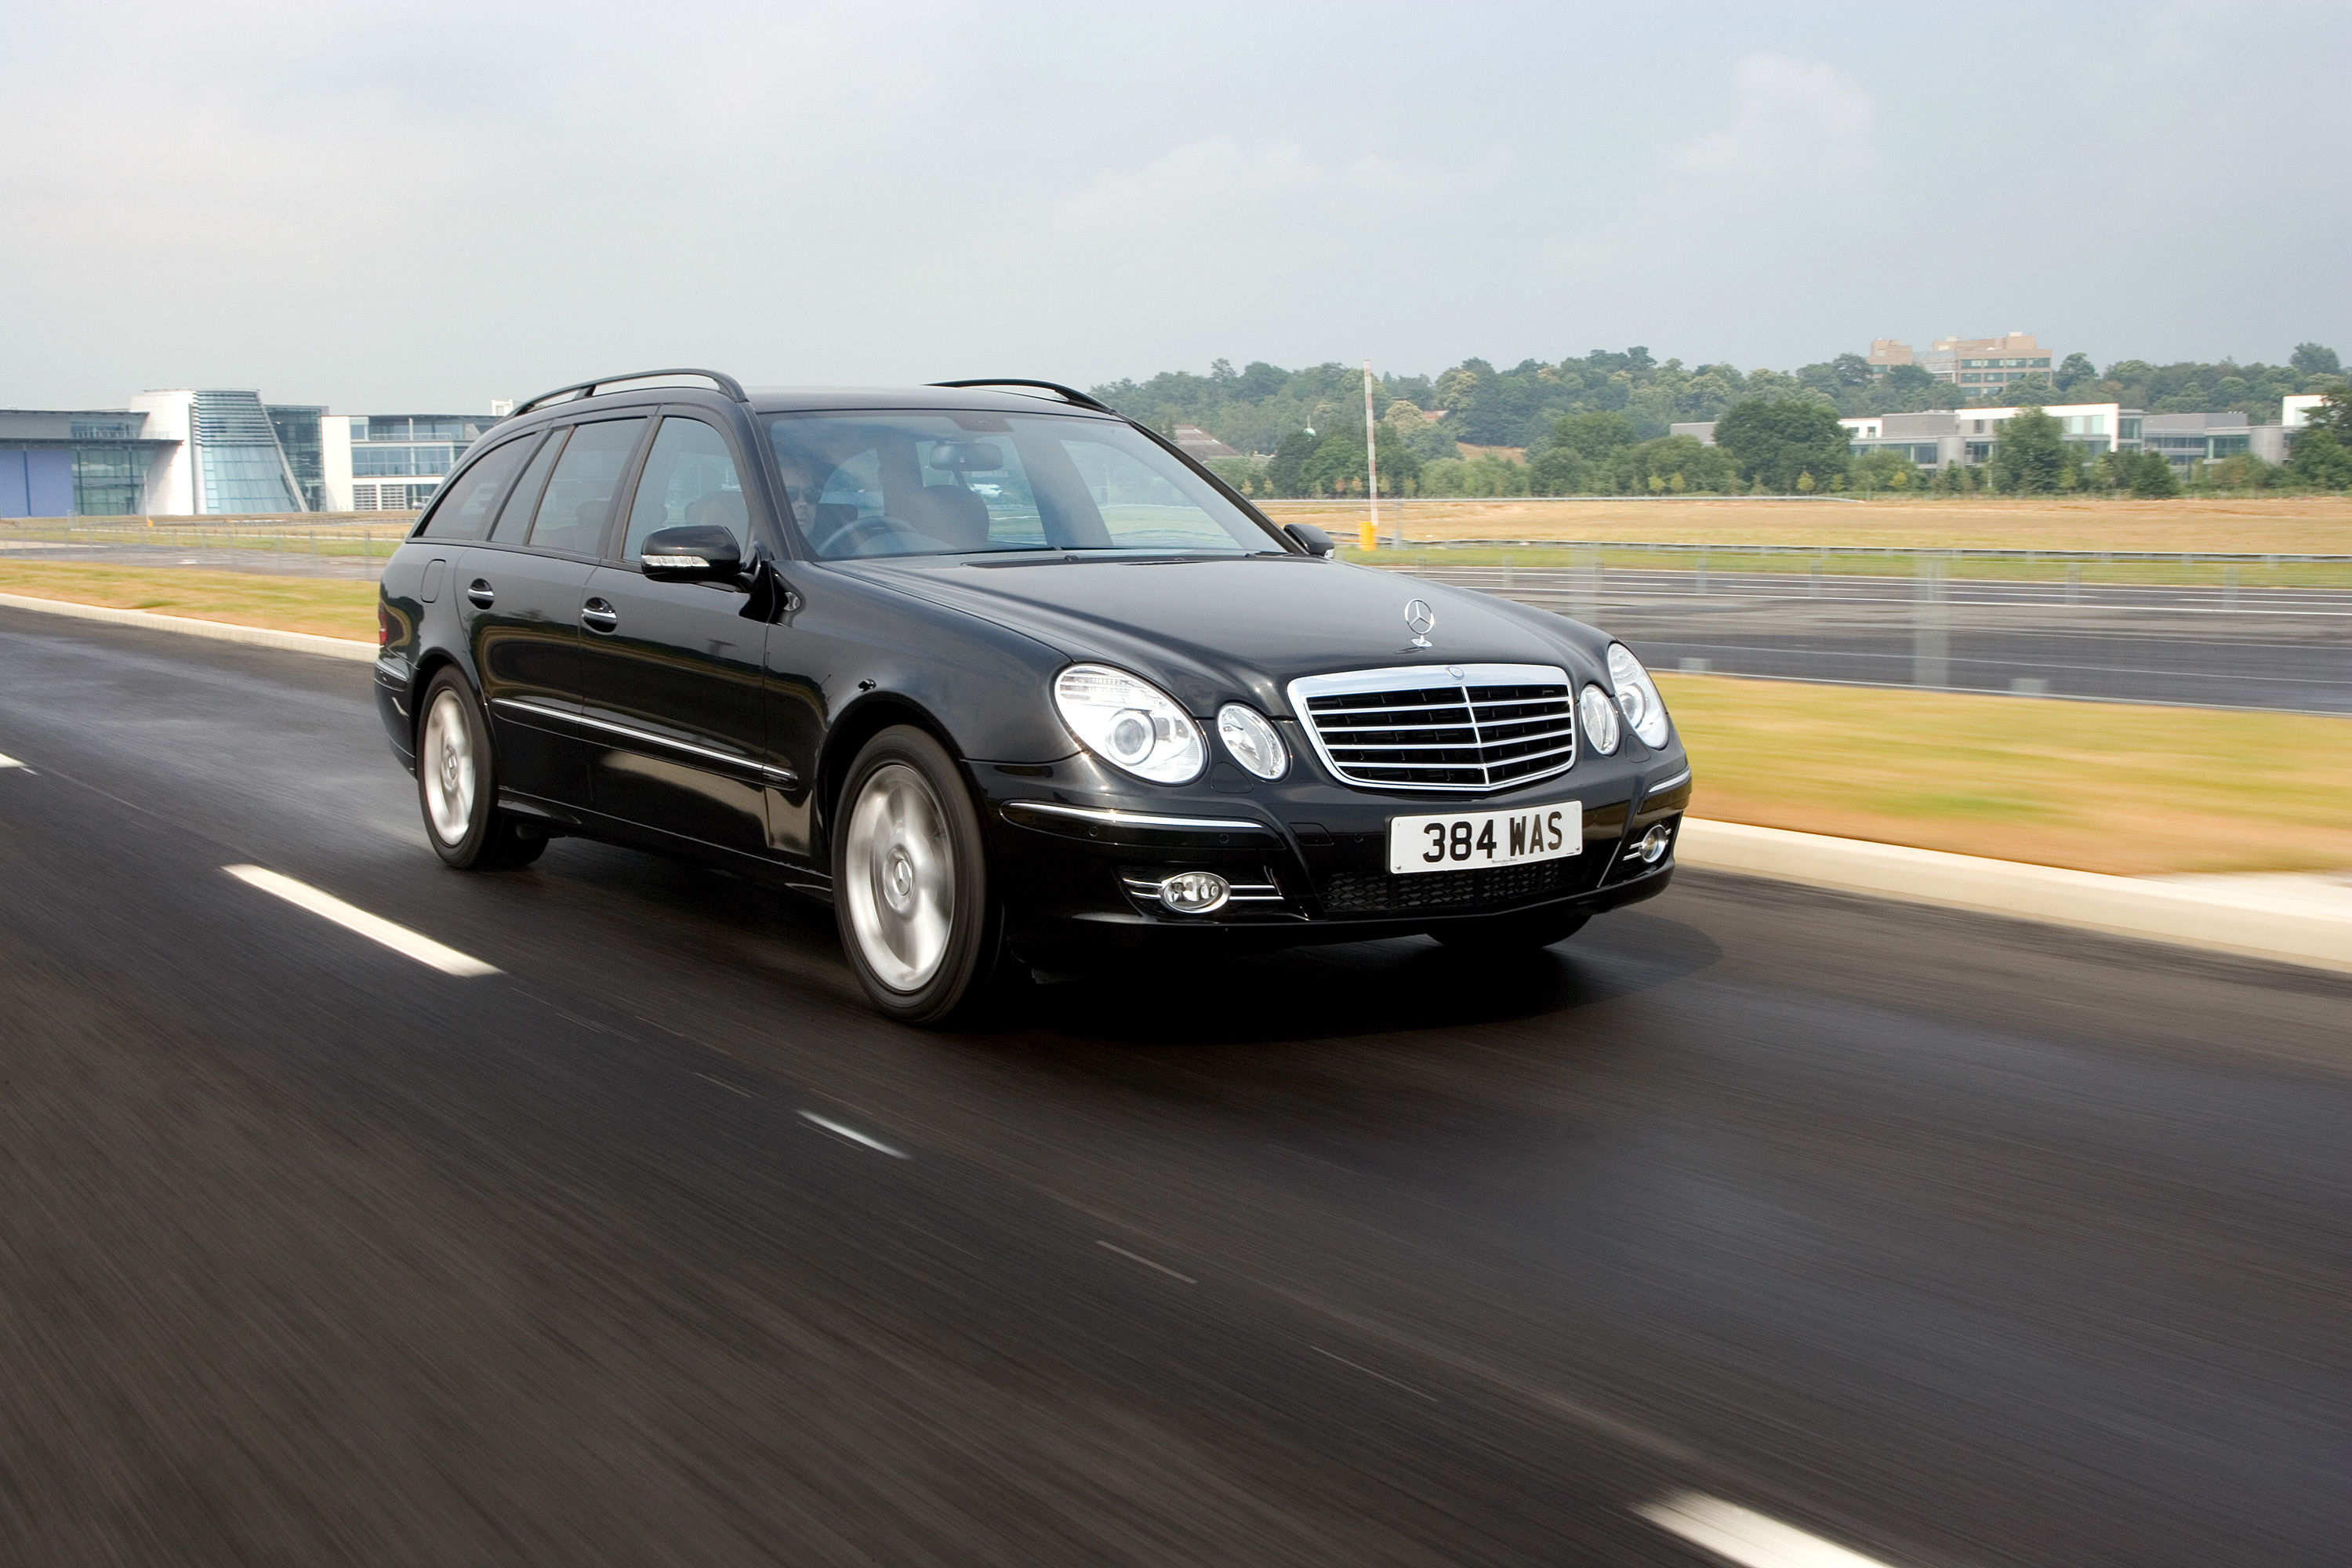 Mercedes E-class: the largest estate you can buy for £6000